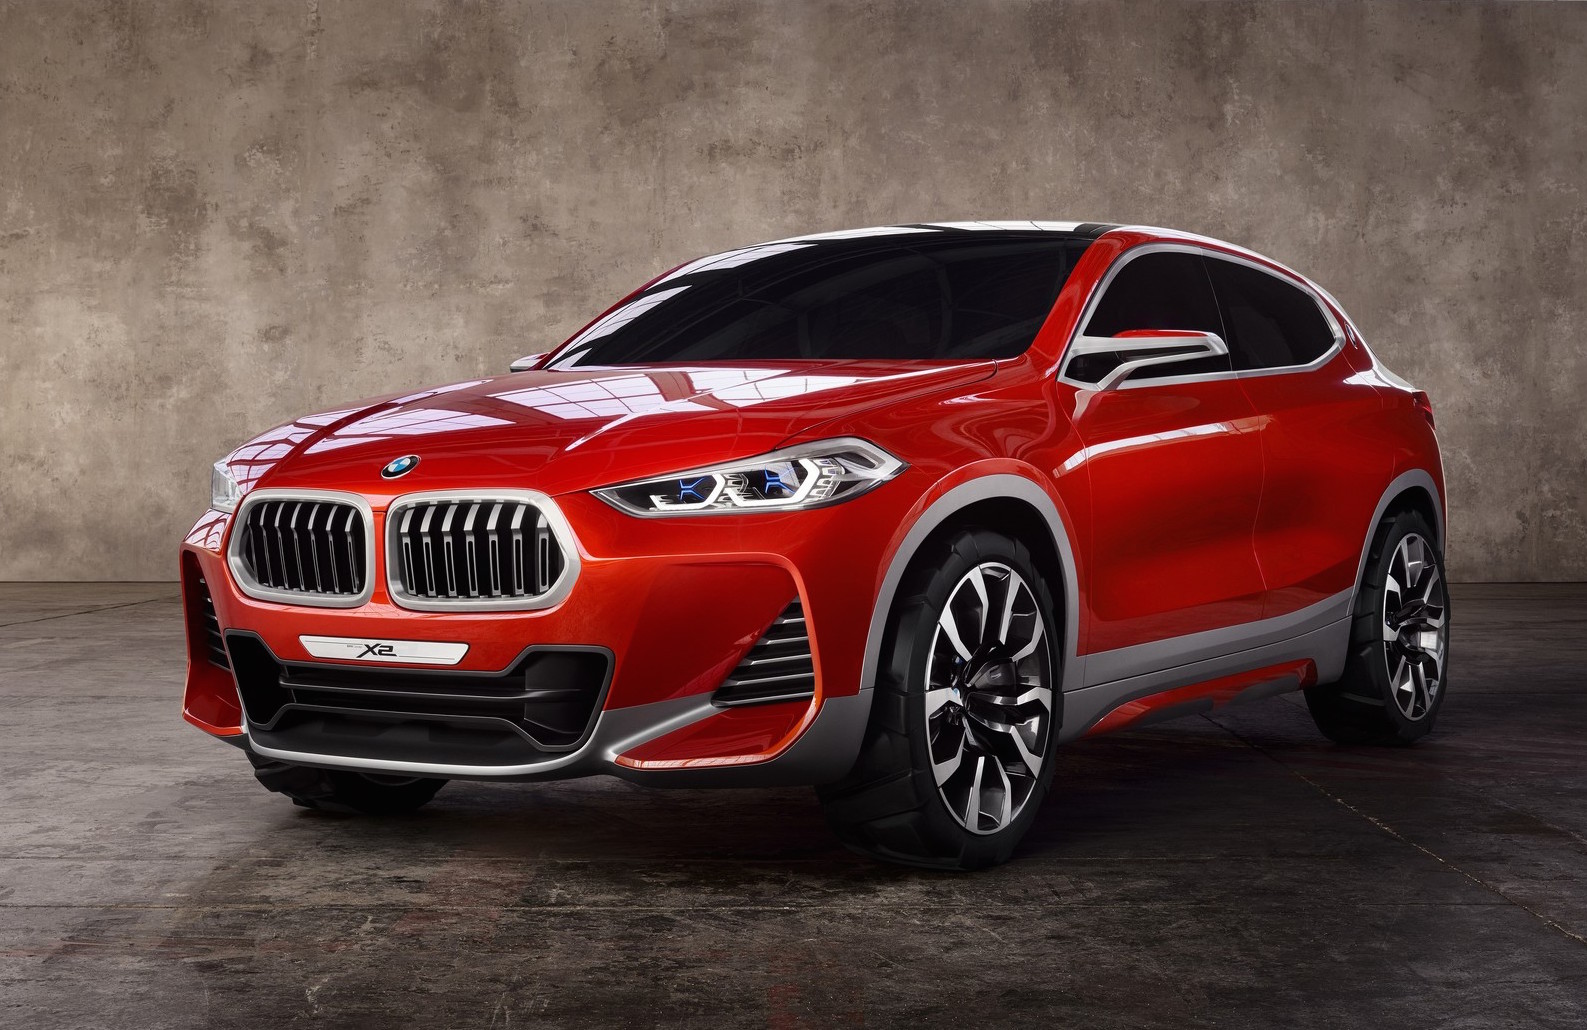 Bmw X2 Concept Previews New Compact Coupe Suv Performancedrive